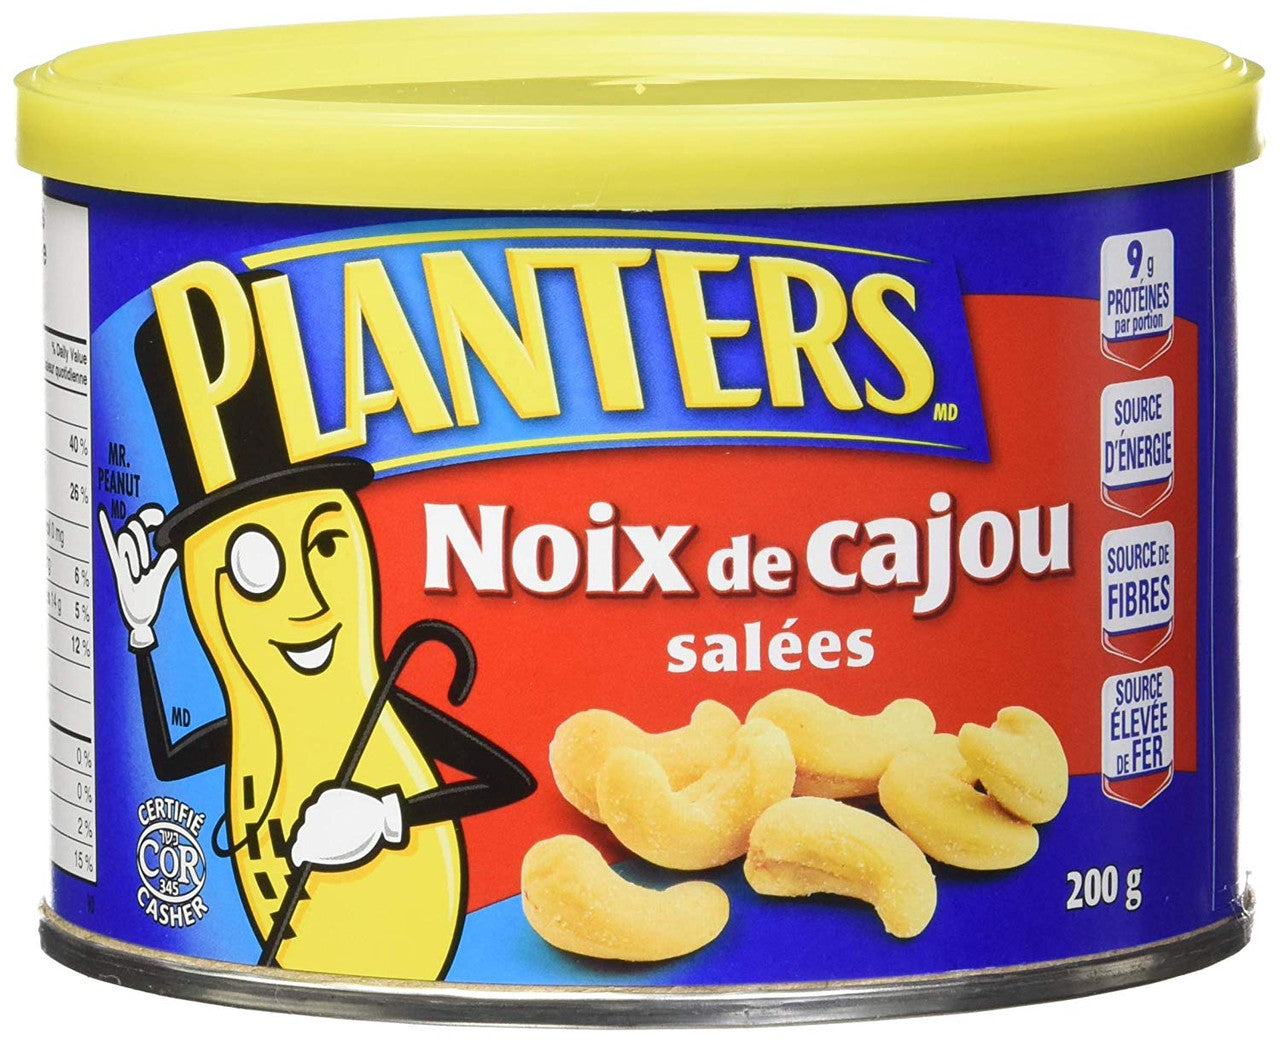 Planters Salted Cashews, 200g/7.1oz., 12 pack, {Imported from Canada}